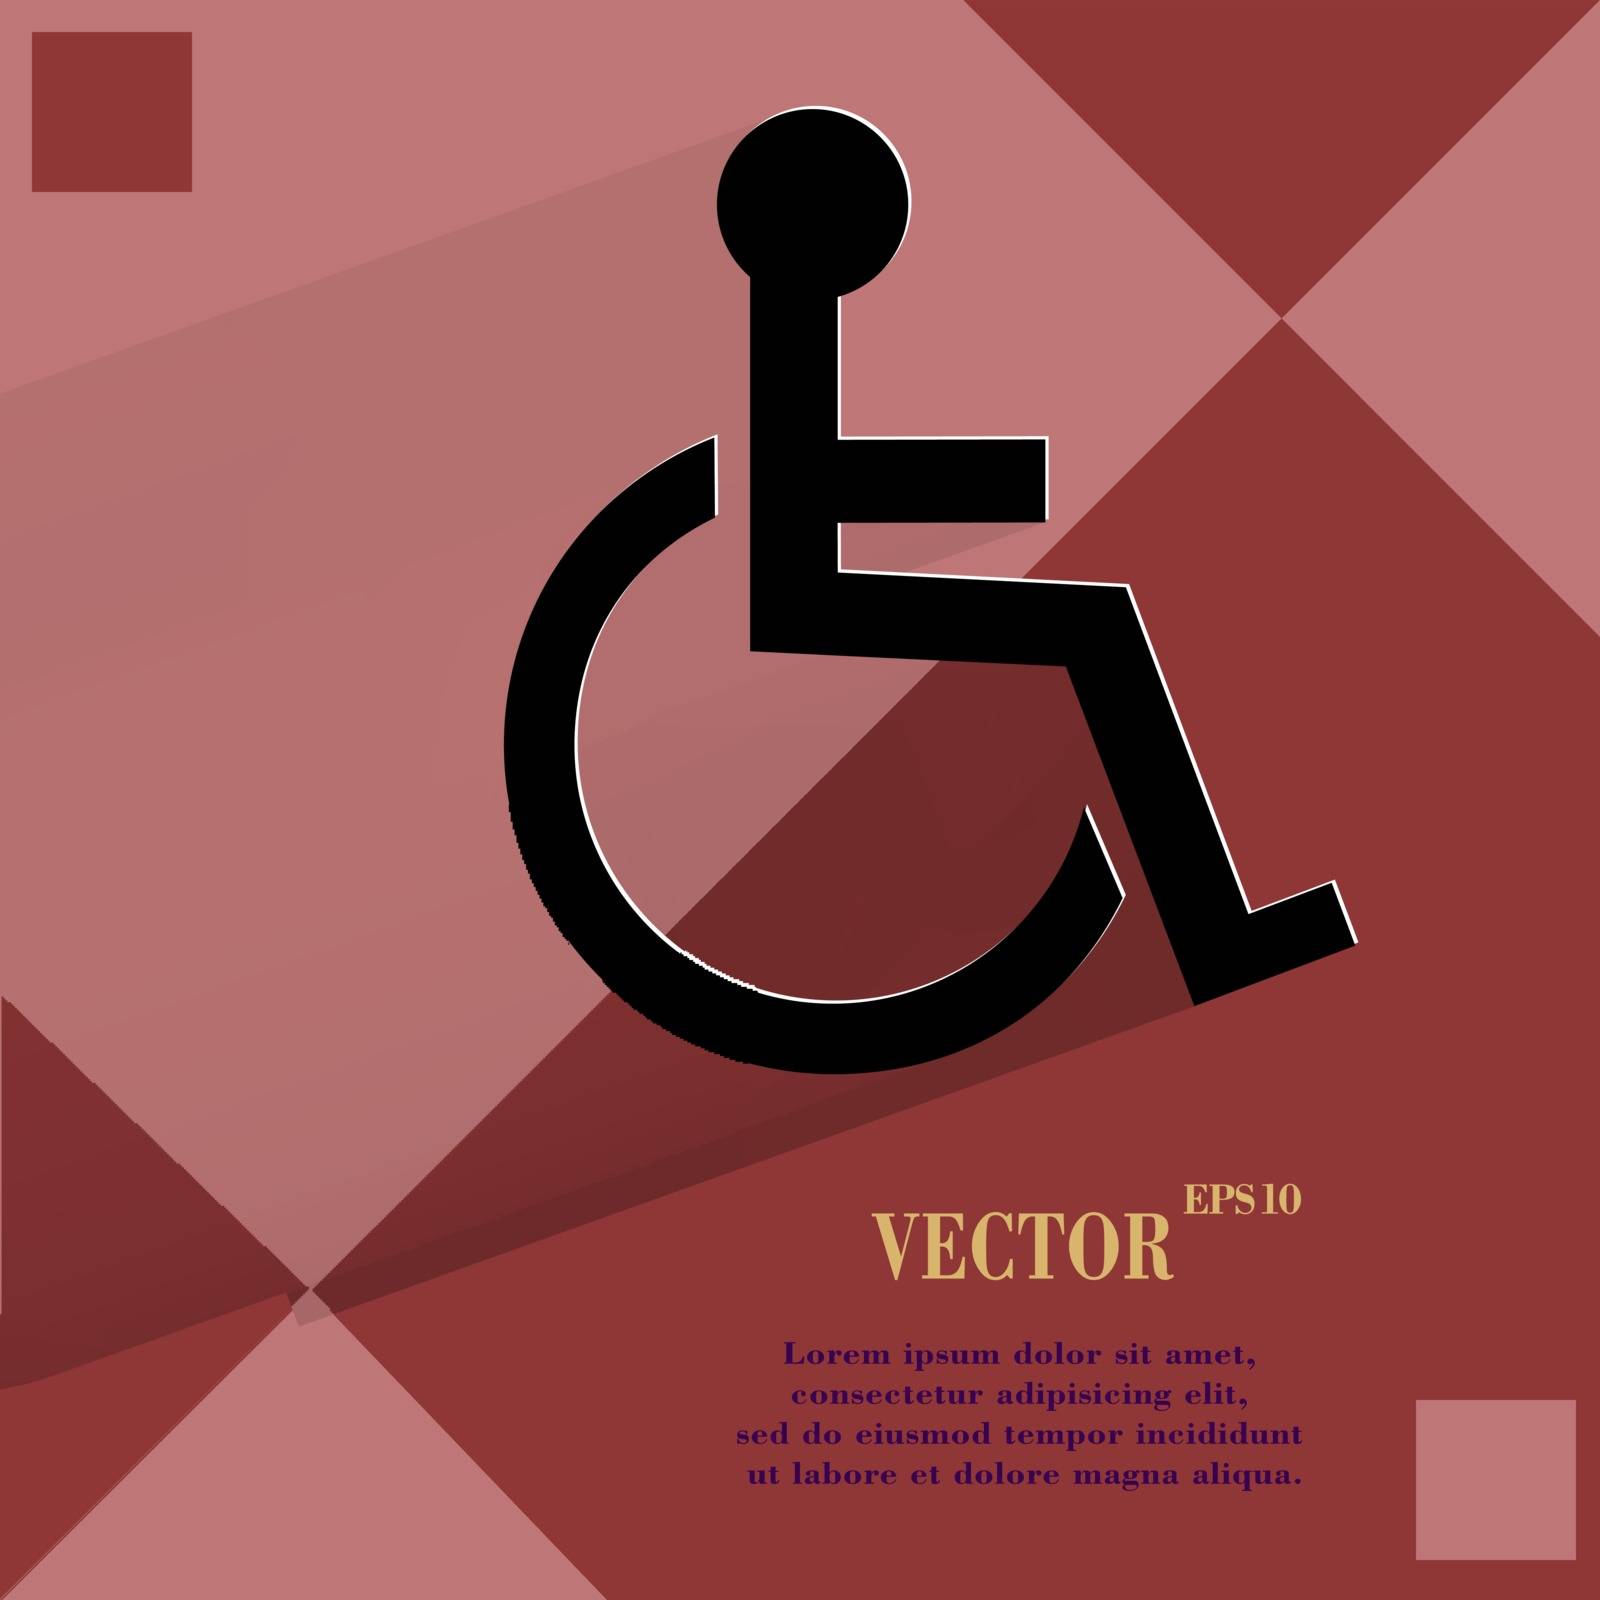 disabled. Flat modern web design on a flat geometric abstract background Vector. EPS10